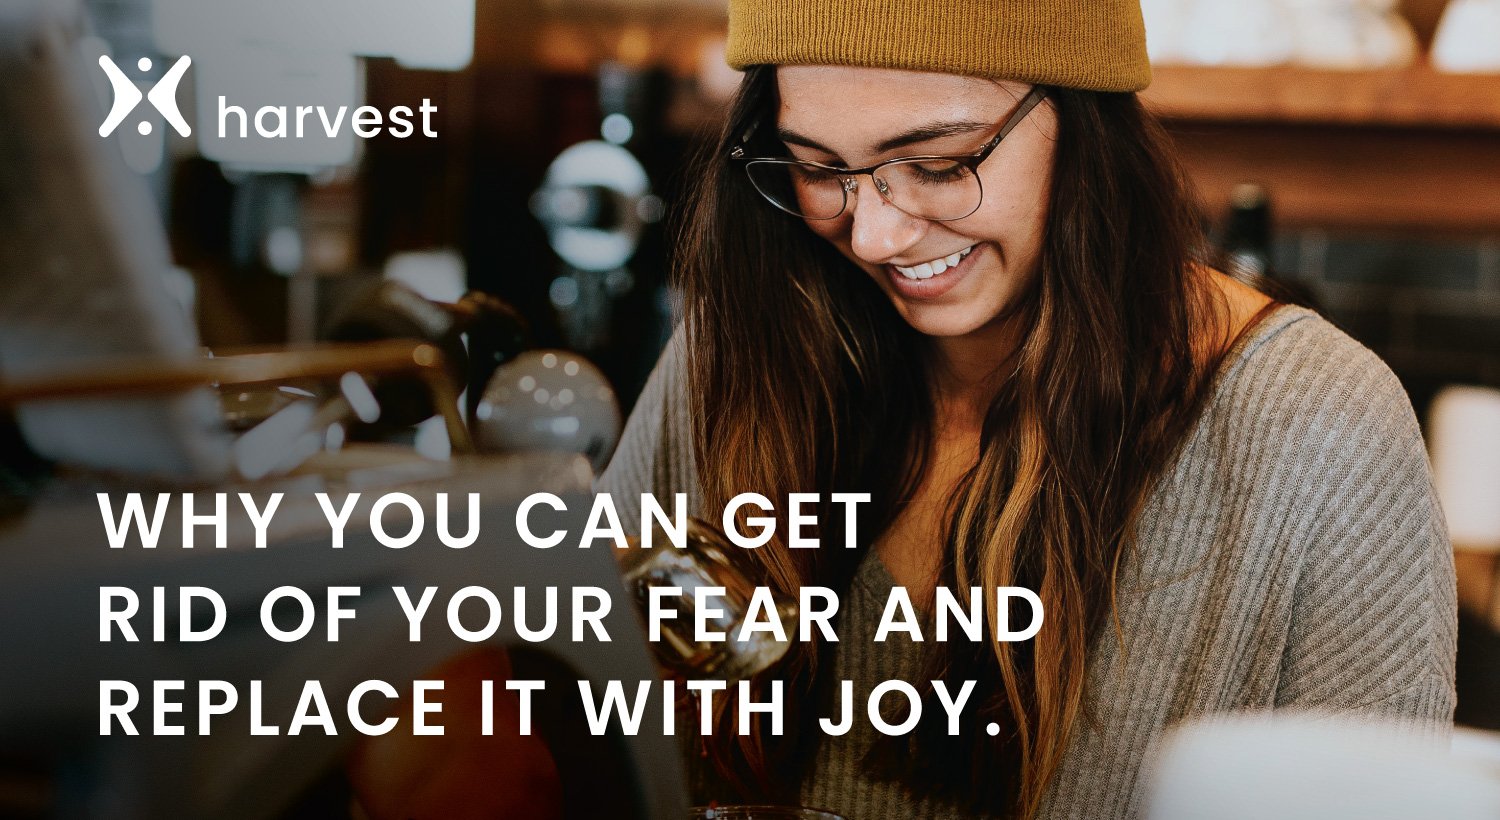 Why you can get rid of your fear and replace it with joy.